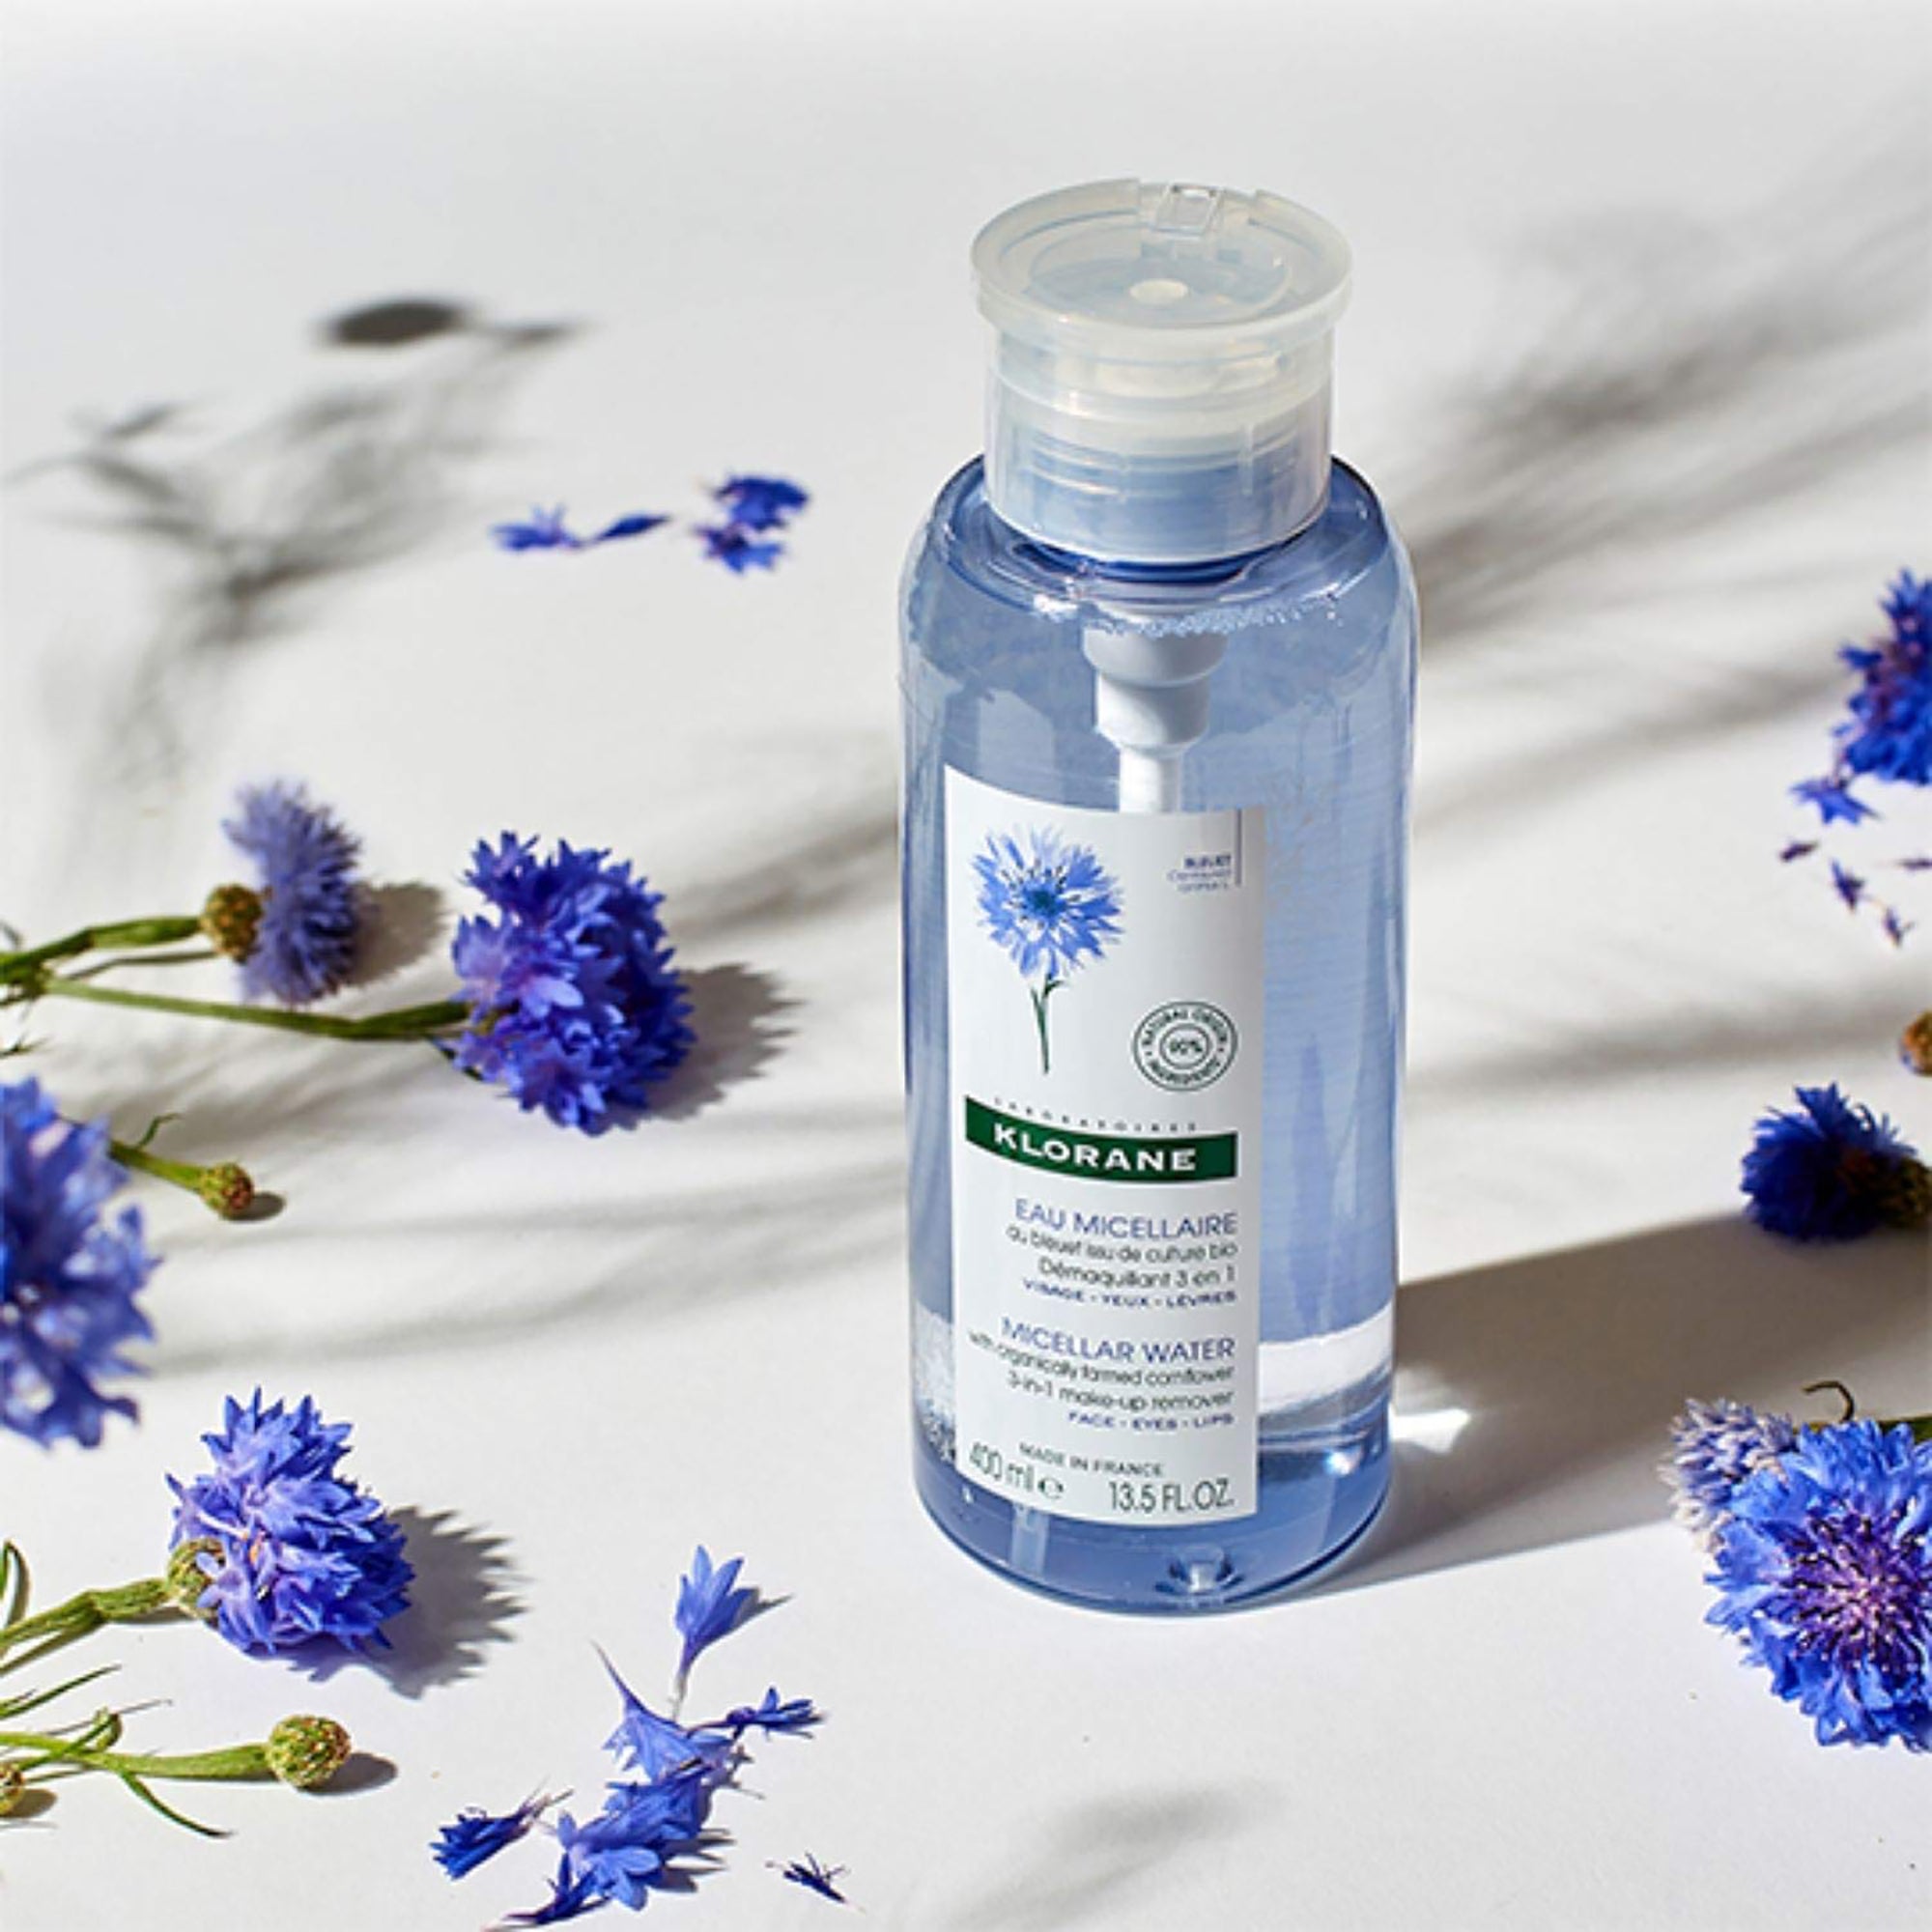 Klorane Micellar Water Make-Up Remover with Soothing Cornflower / 13.OZ